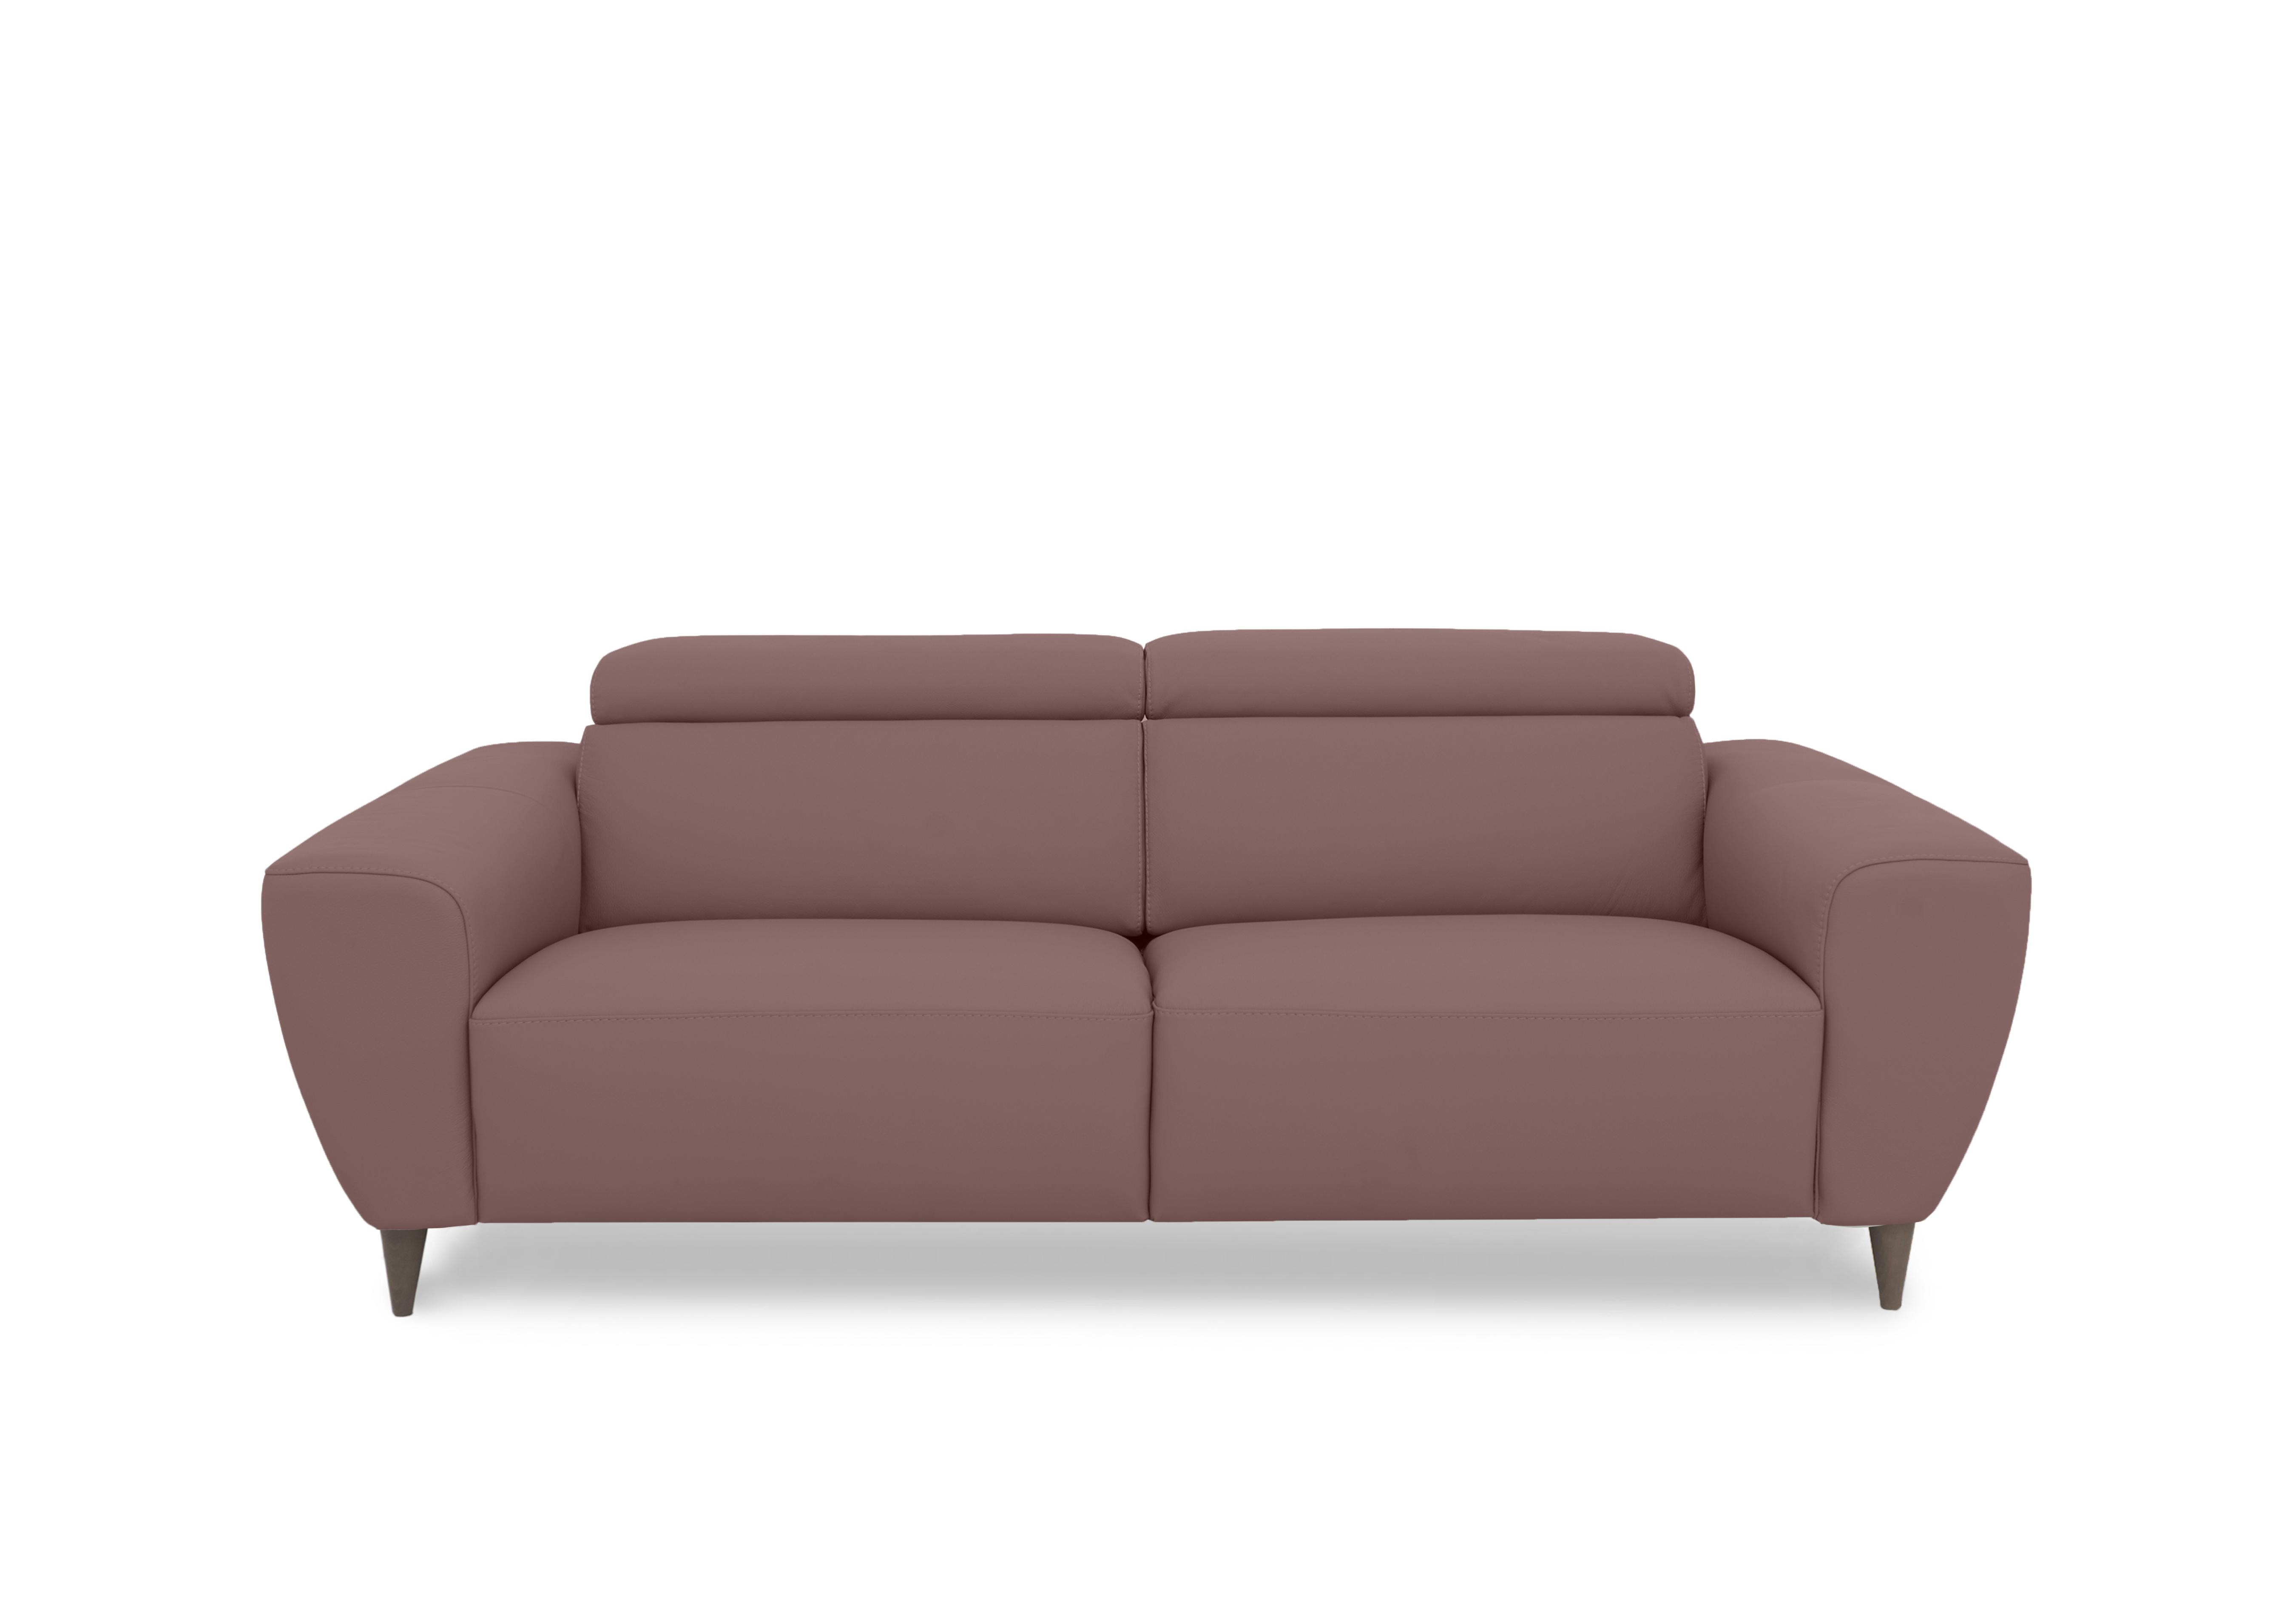 Milano 3 Seater Leather Sofa in 2160 Botero Cipria To Ft on Furniture Village